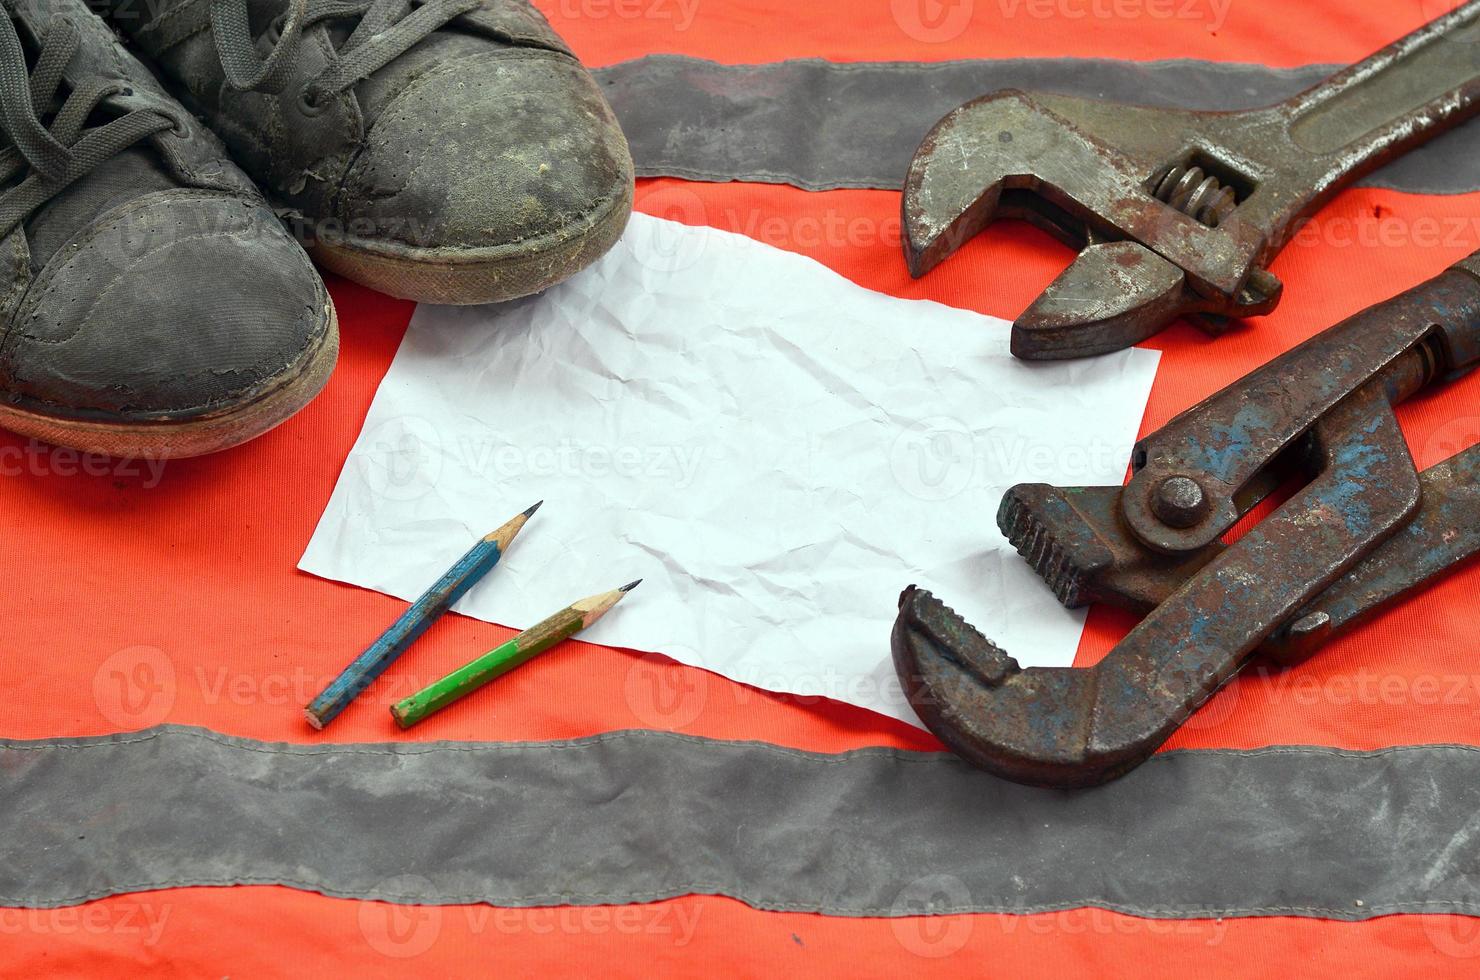 Adjustable wrenches with old boots and a sheet of paper with two pencils photo